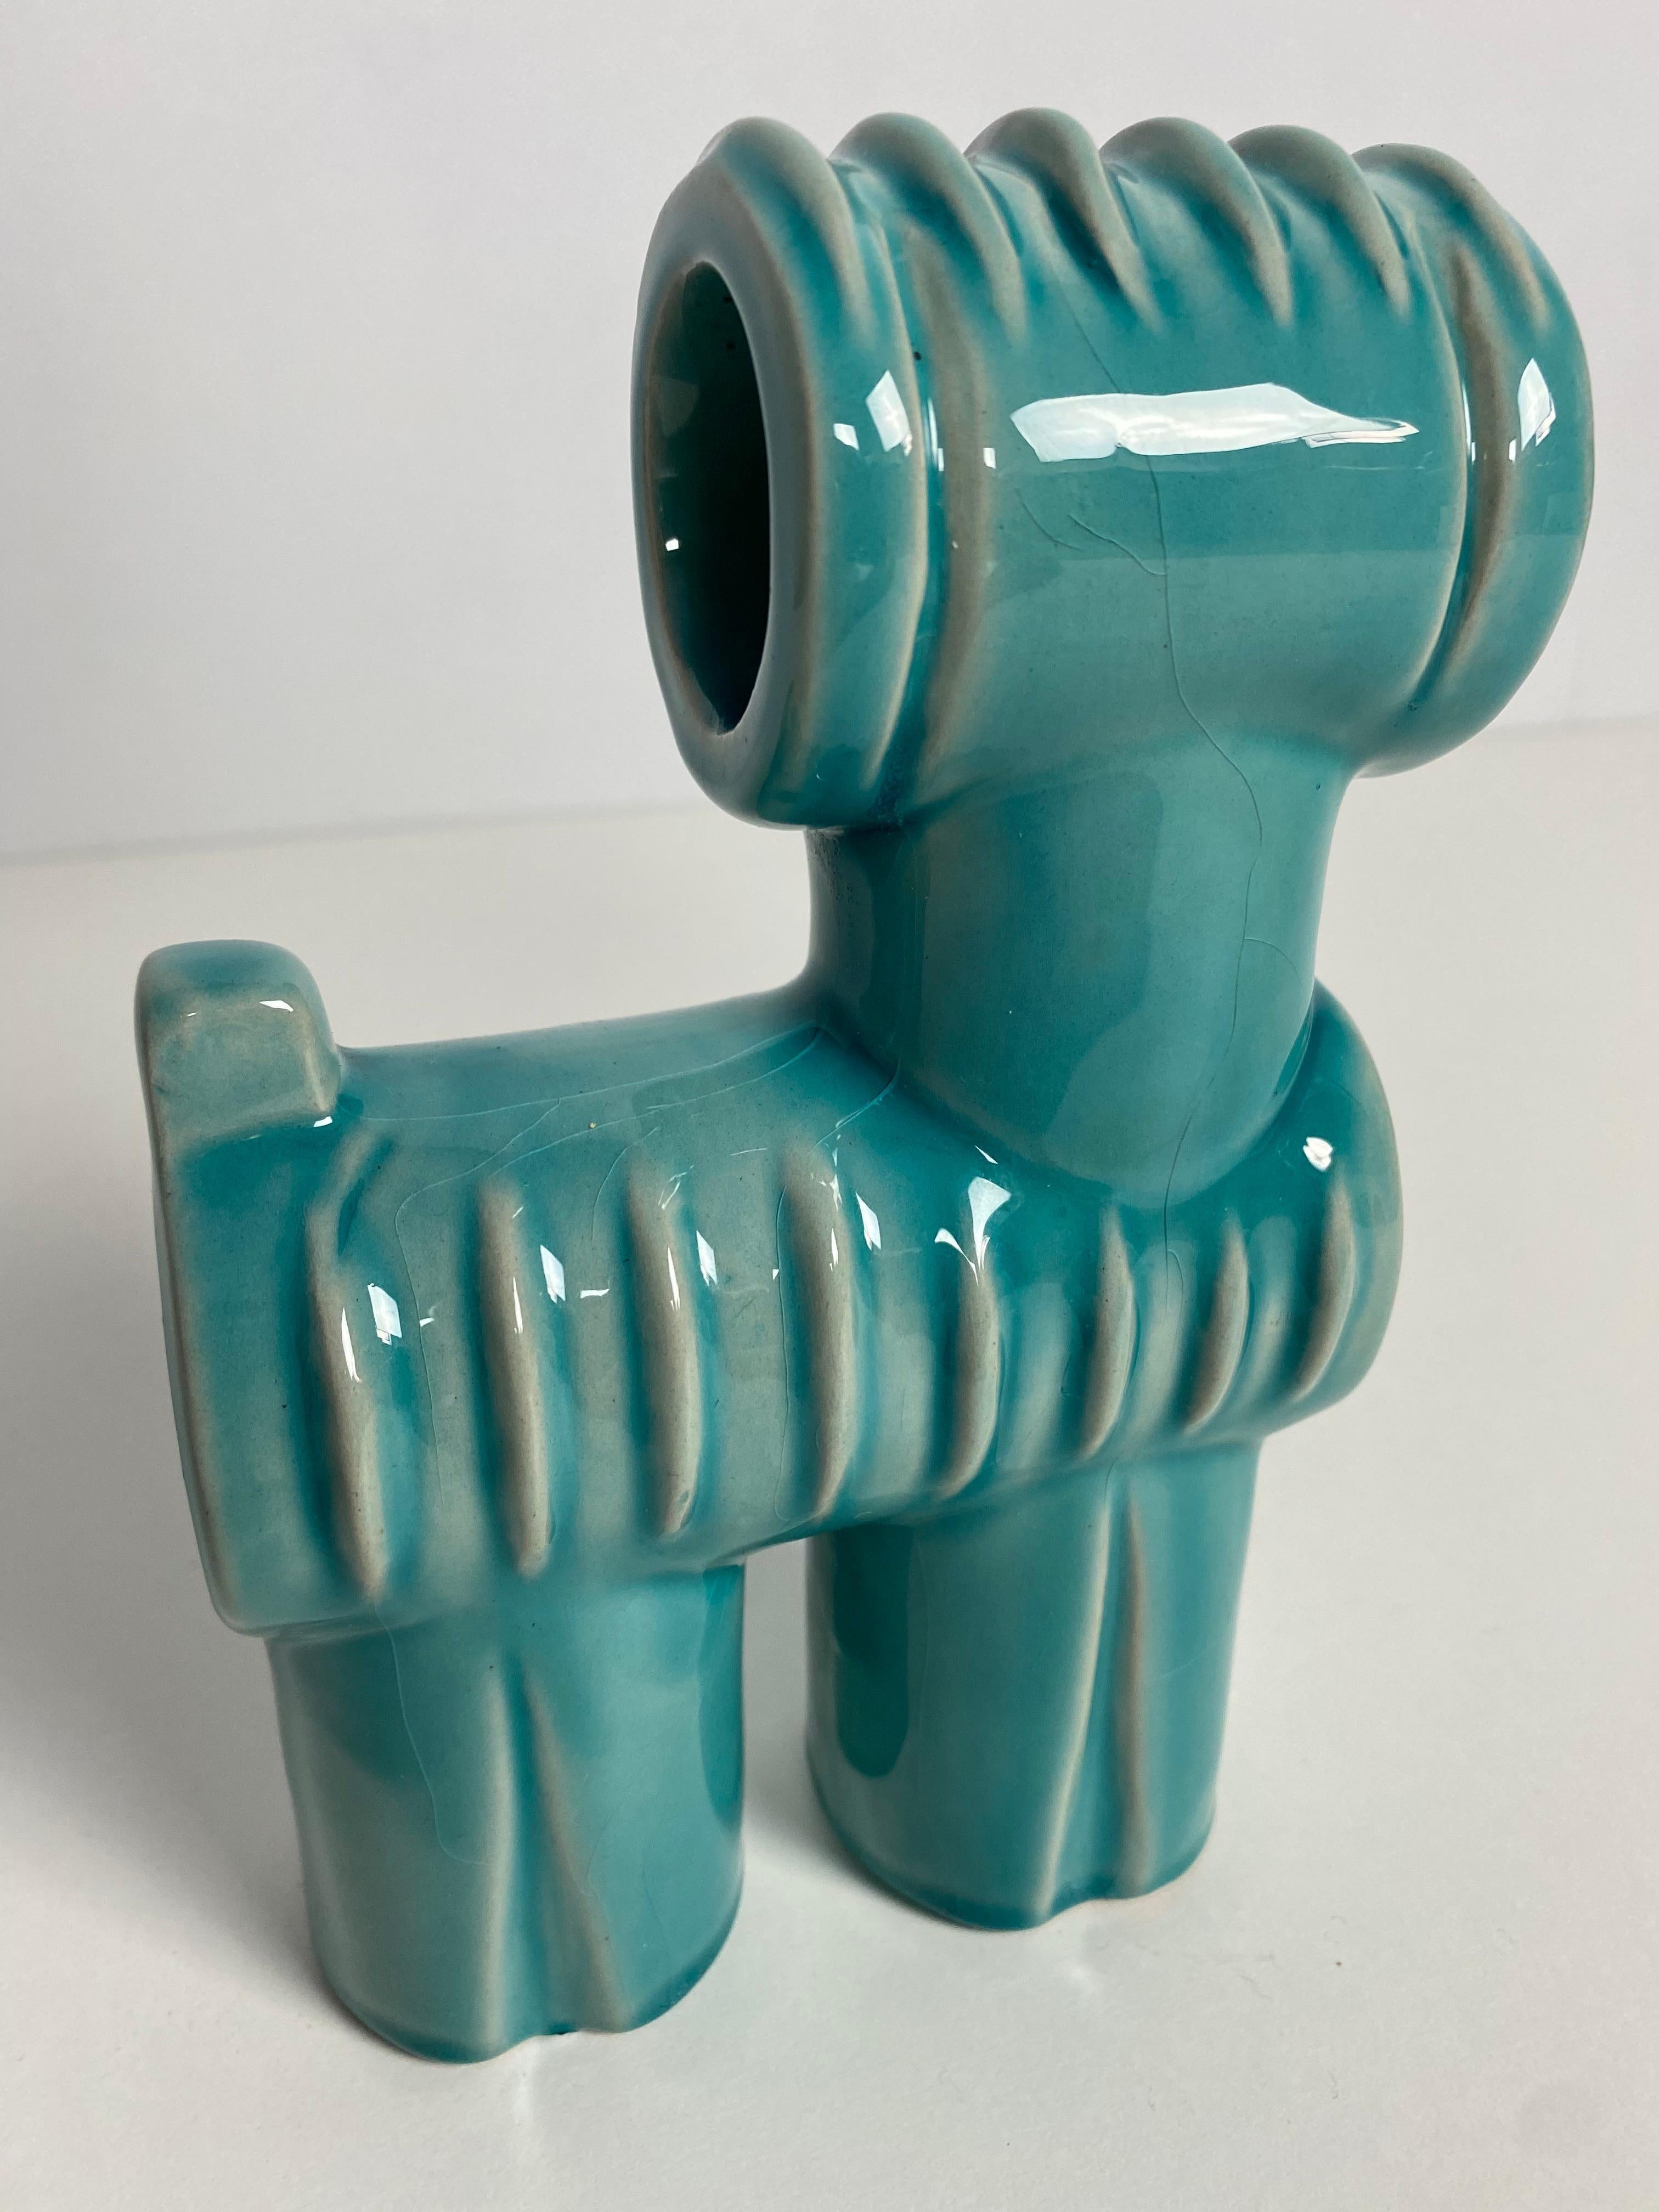 Porcelain cubist dog with a blue pre-eosin glaze by Judit Nádor of Pécs porcelain factory, Zsolnay.

Dimensions (cm, approx): 
Height: 18 
Width: 11 
Depth: 6

Good condition with cracks to the glaze (not the porcelain).